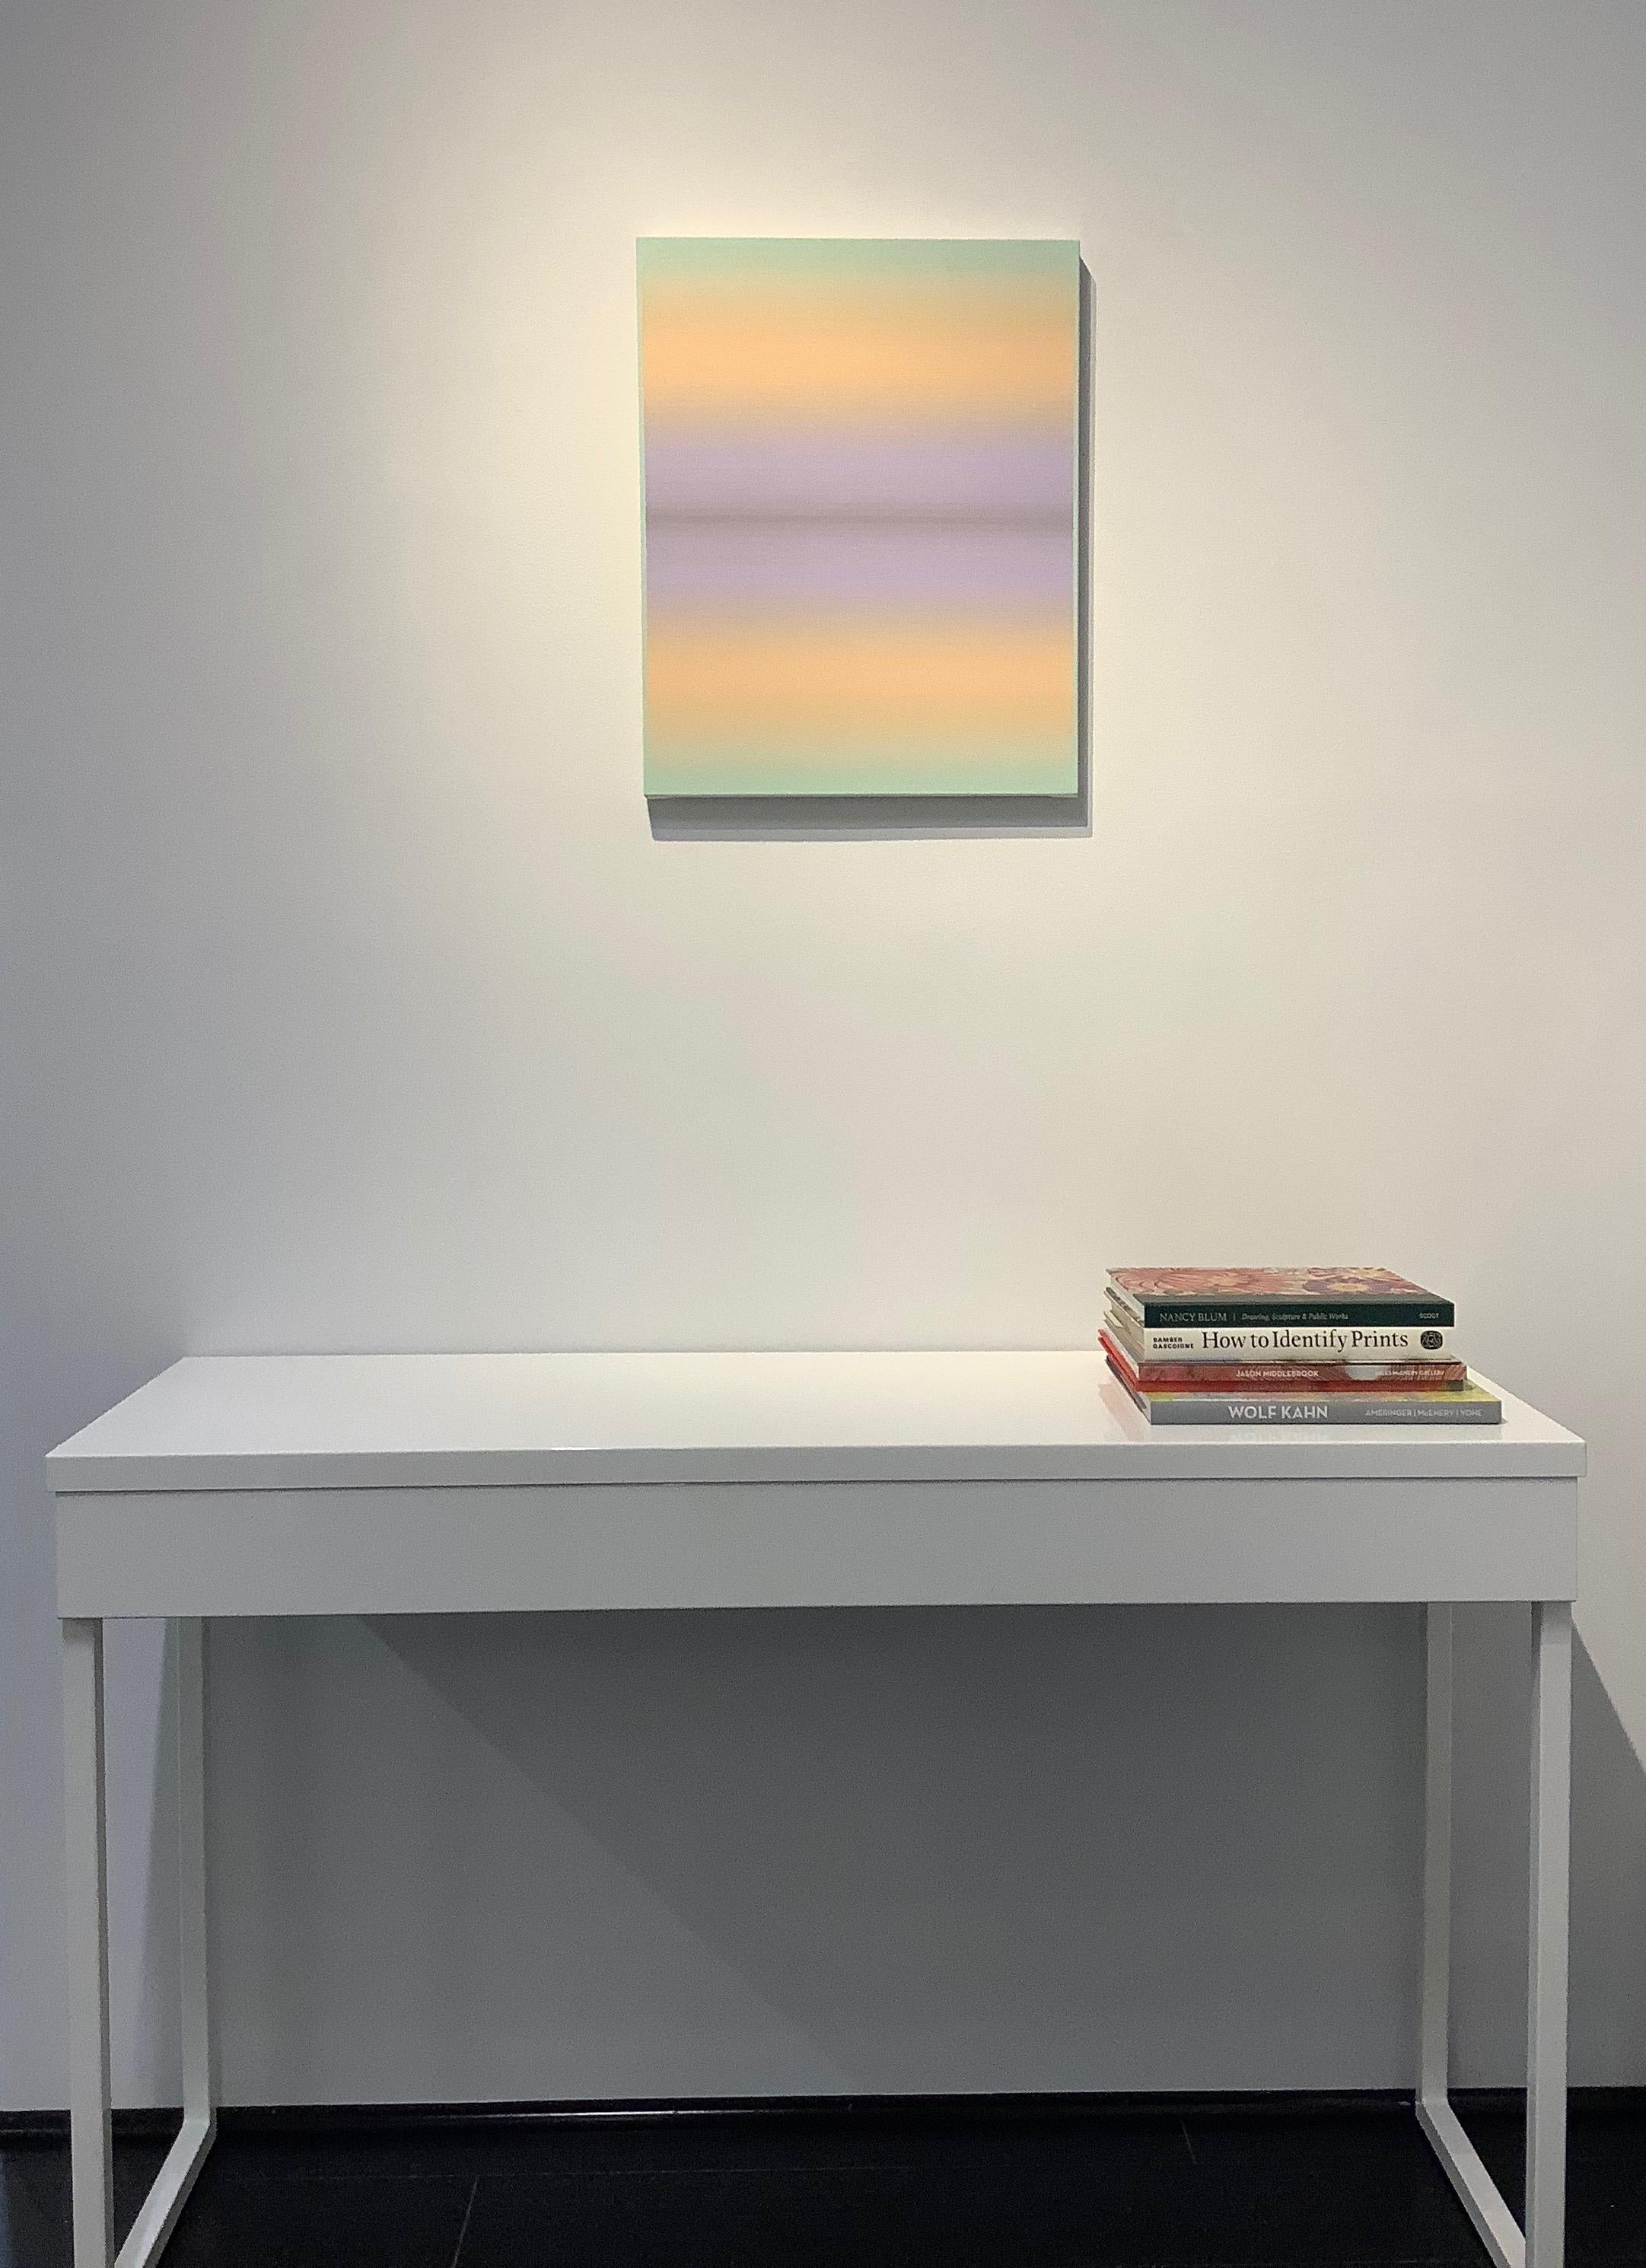 Thin stripes of color in gradient shades of soft hues, starting with lilac and pale purple in the center to pale peach and mint blue green at the edges. Signed and titled on verso.

Audrey Stone has spent her lifetime being fascinated with color and